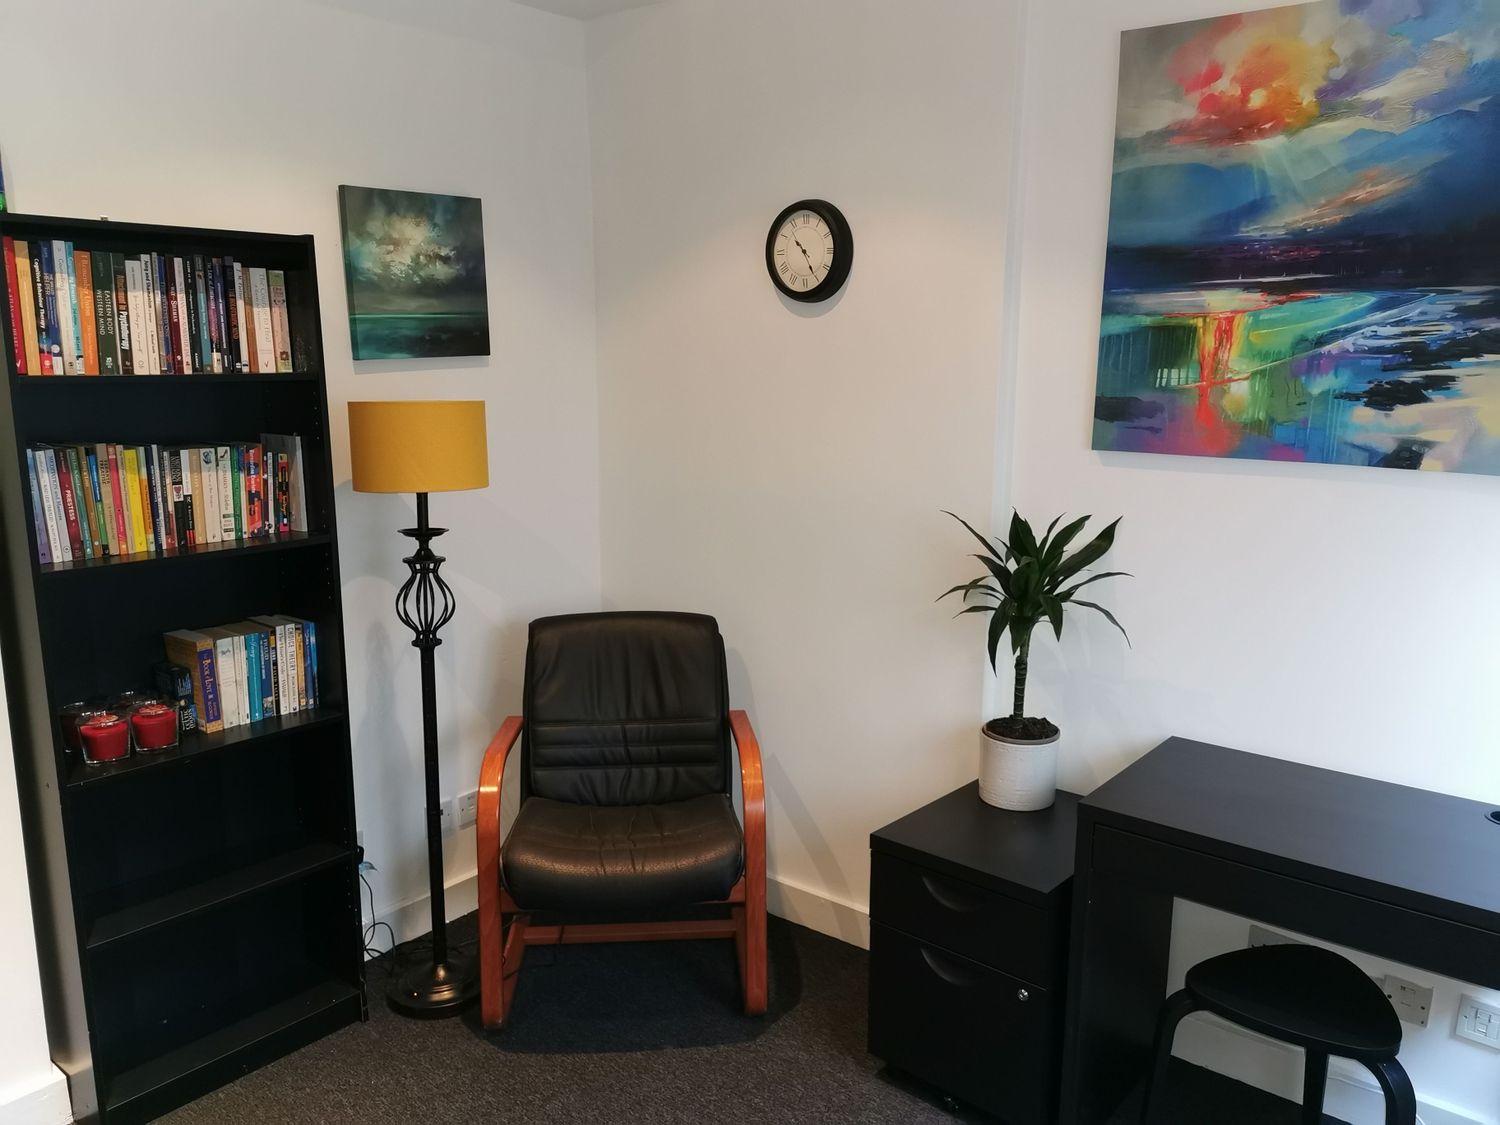 Gallery Photo of Therapy Room 1 - Rathmines